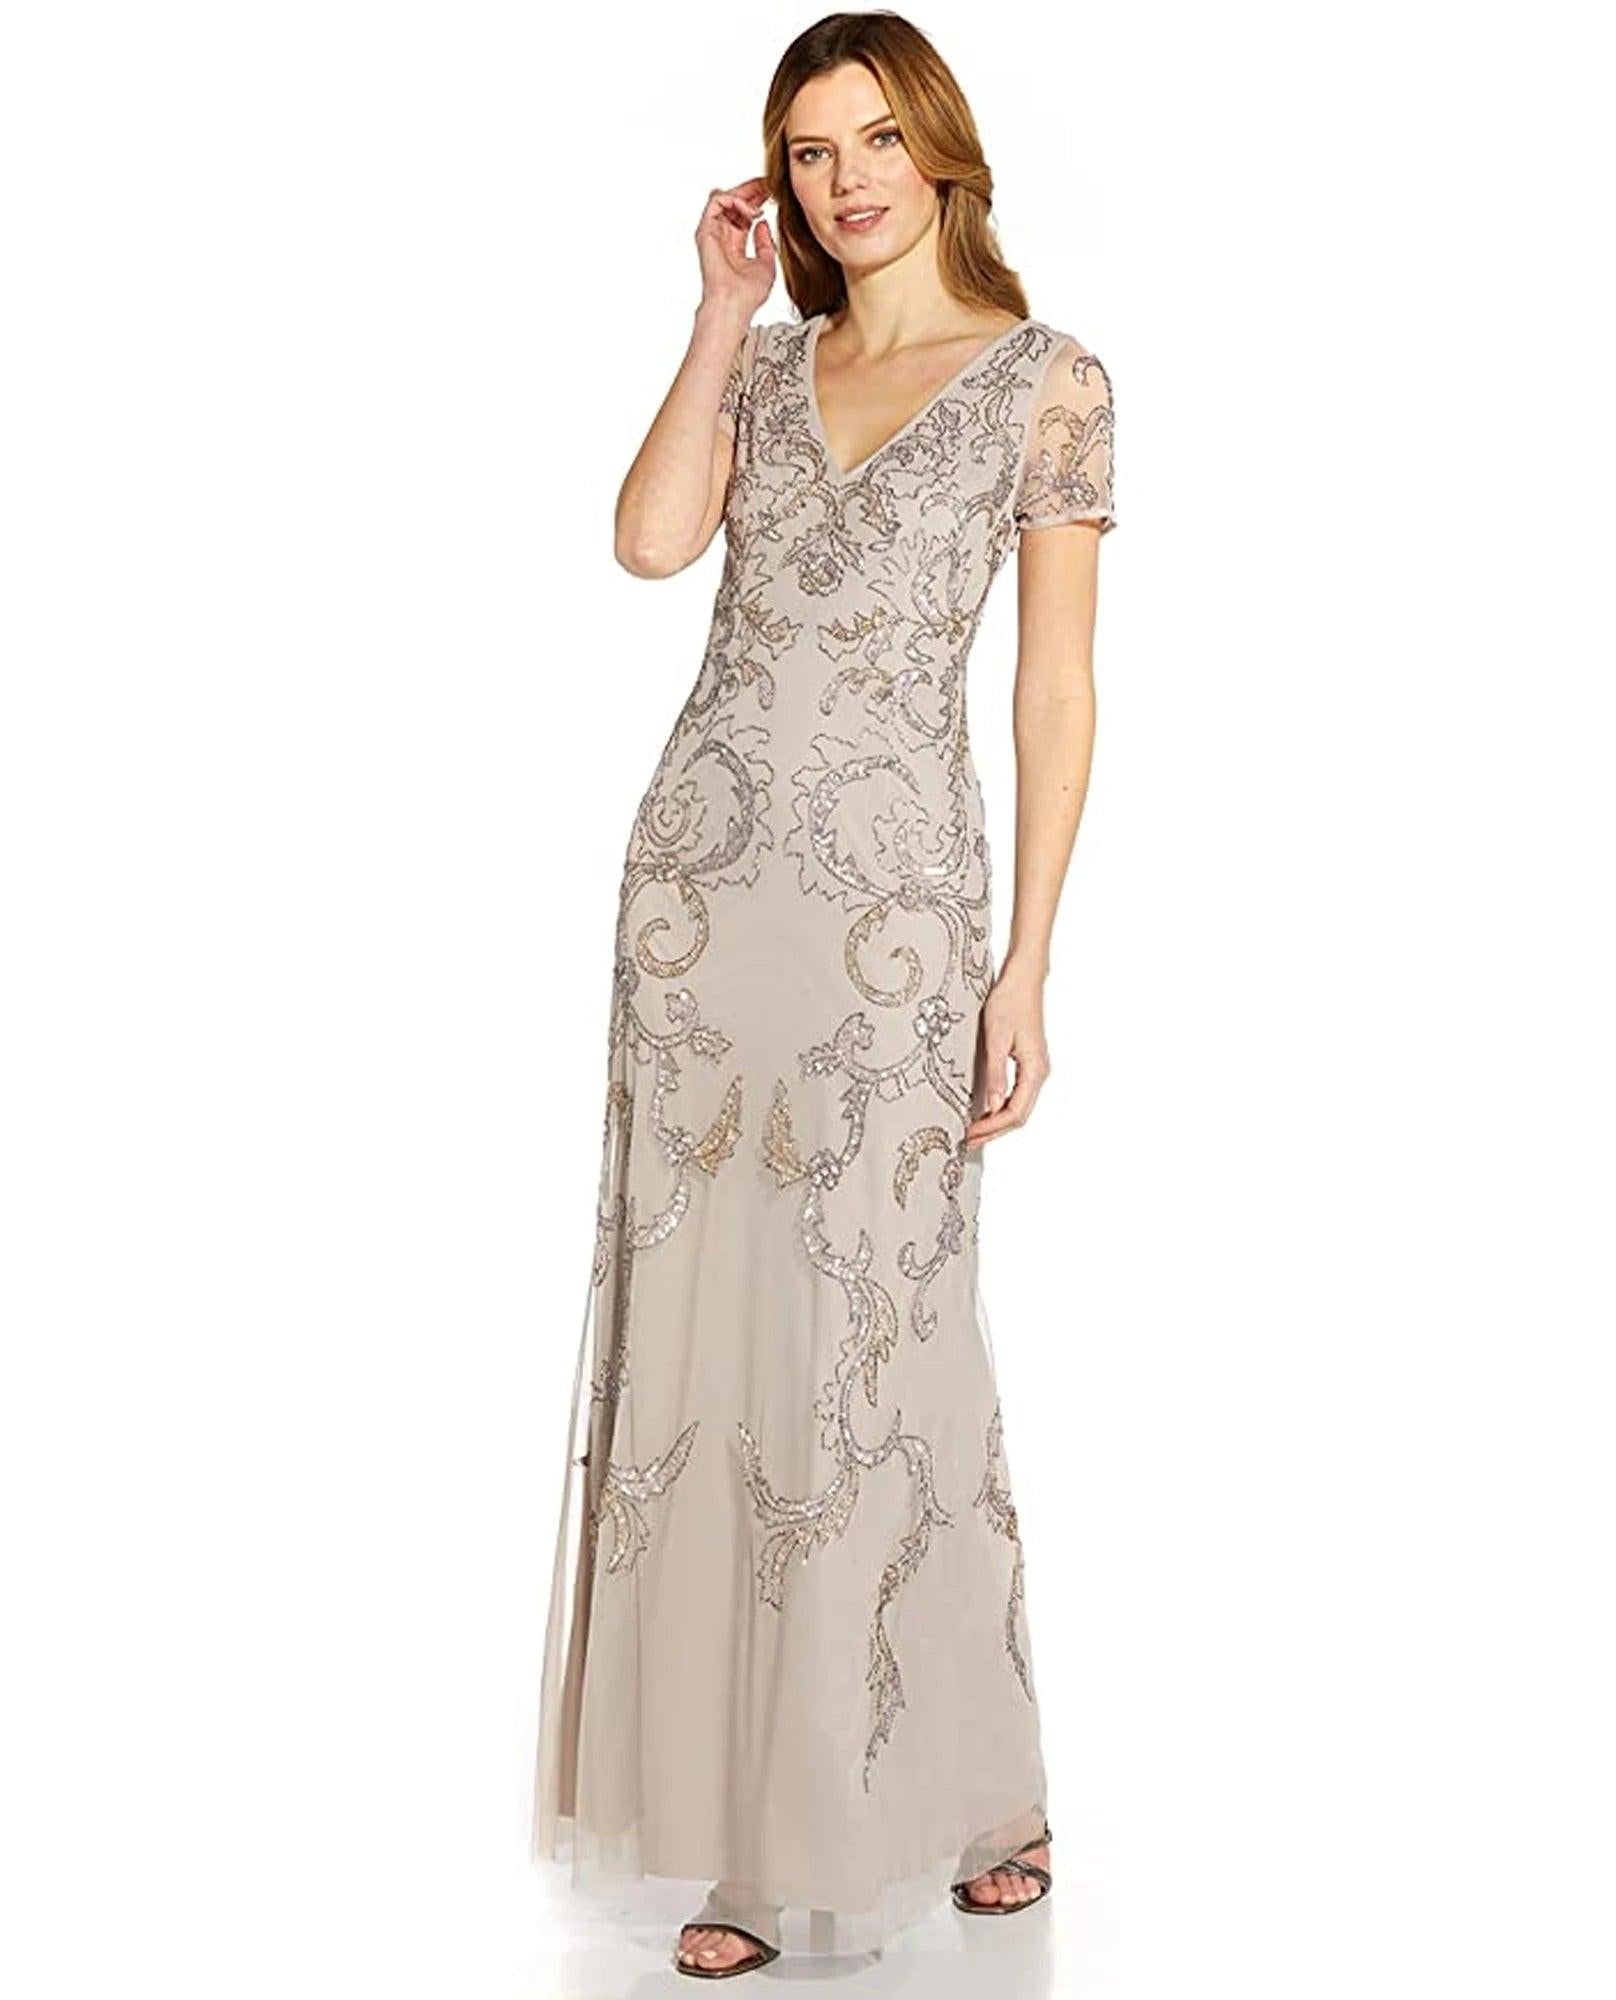 Adrianna Papell AP1E209163 W Formal Beaded Dress | Dress Outlet